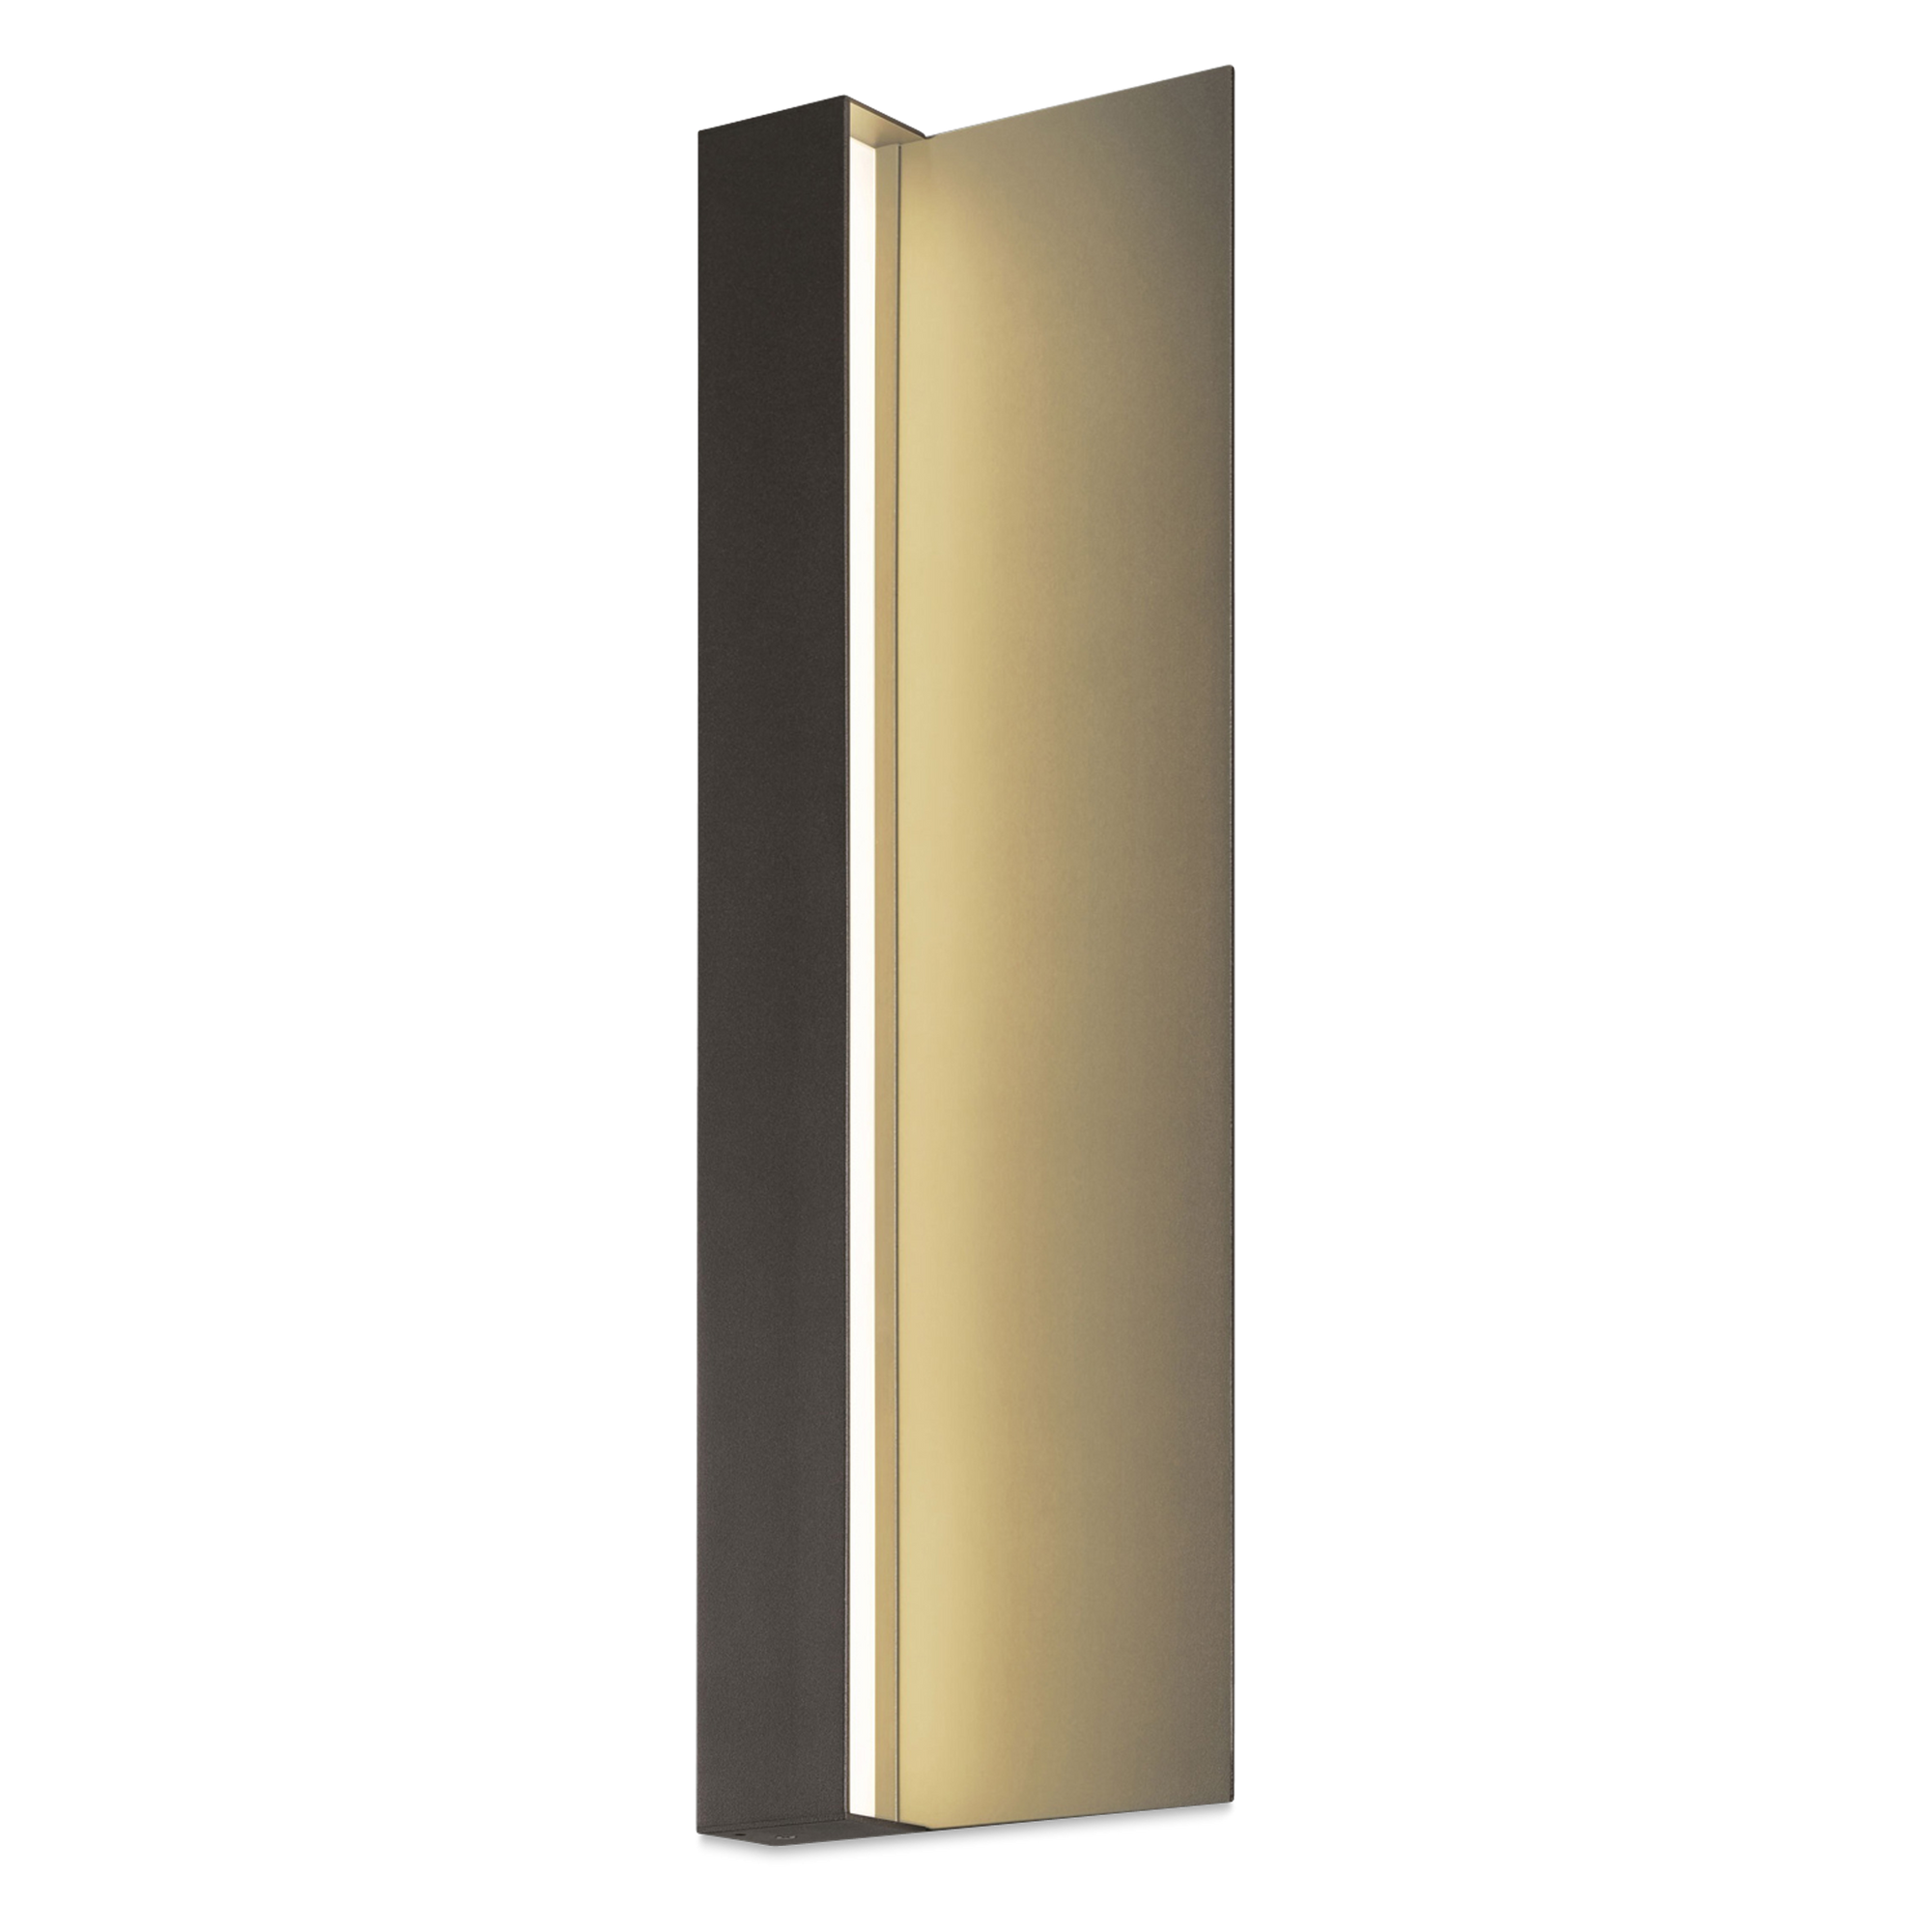 A wash of radiant LED illumination is directed to one side of this architectural linear form, revealing the texture of its bronze panel and the surface beyond.